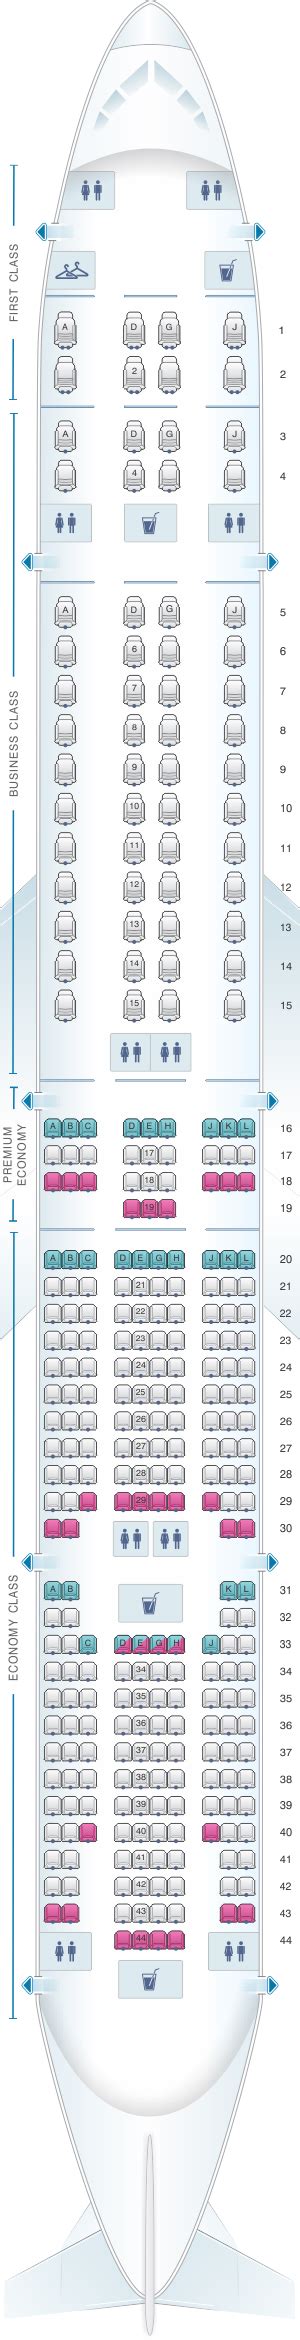 Boeing 777 300er seat map american airlines. 42L. this seat may have limited recline. this seat is near the lavatory. 43L. this seat has extra legroom. no underseat stowage. no under-seat stowage during takeoff and landing. traytable in armrest means narrower seat. 33K. 